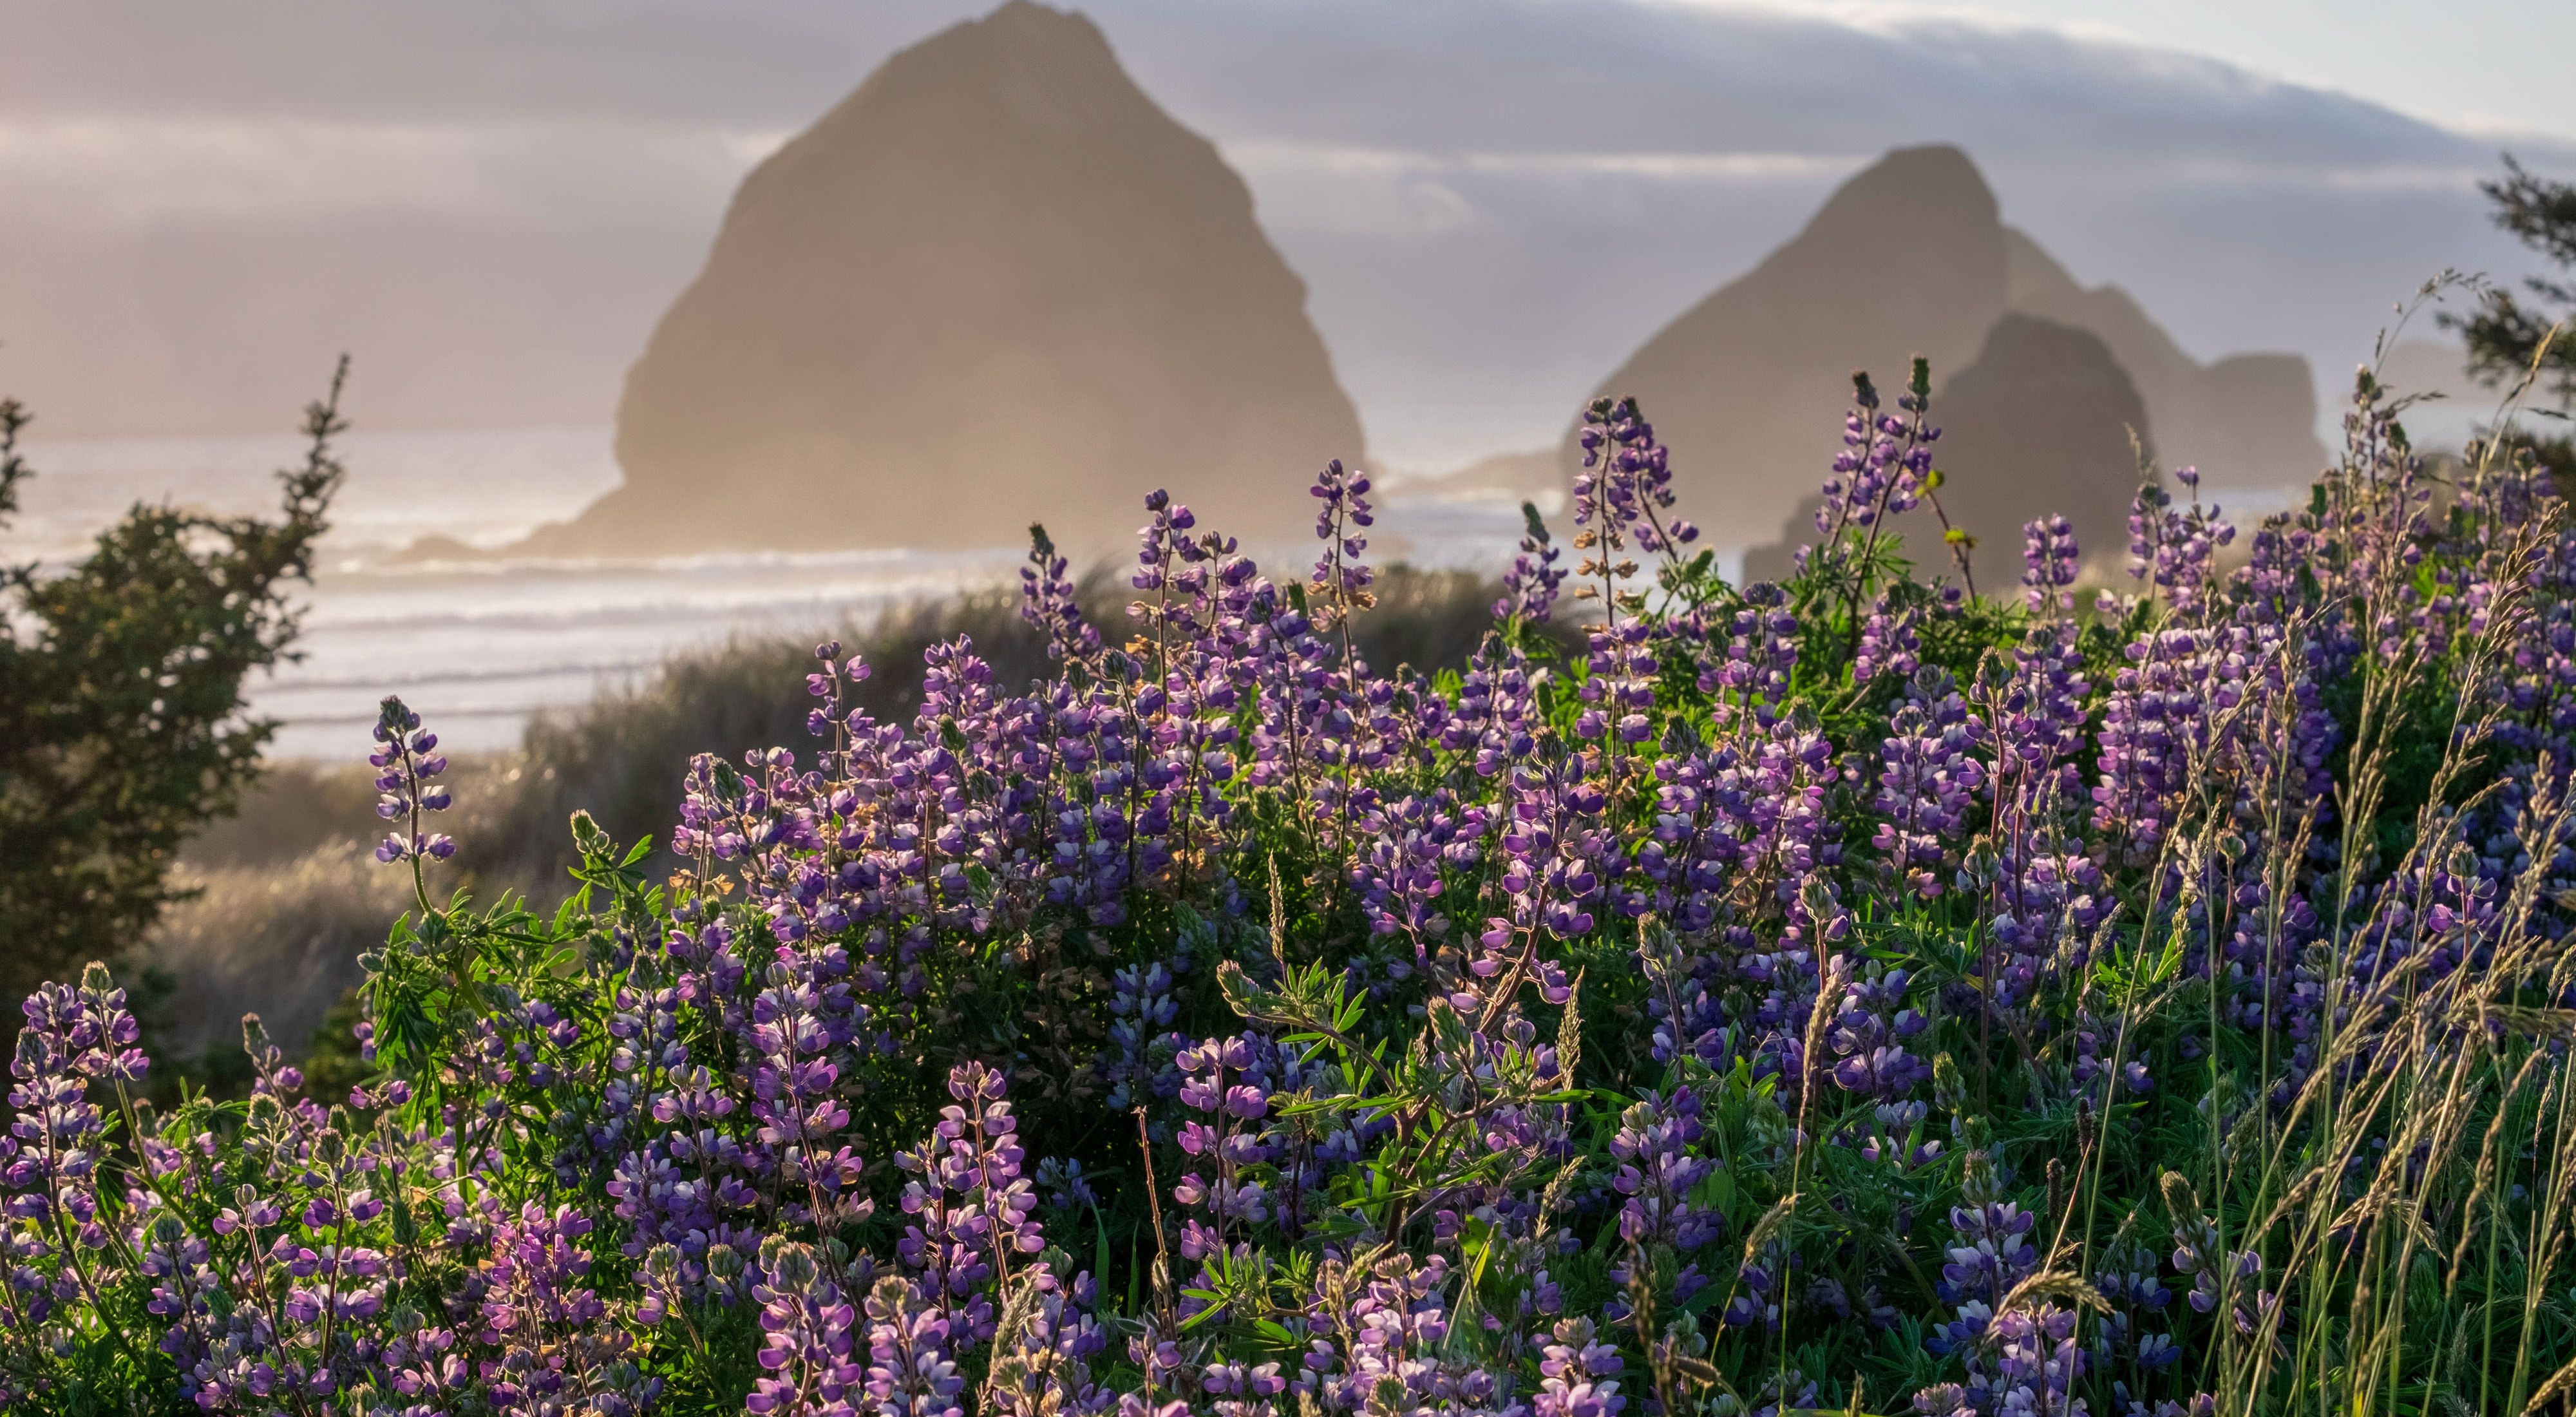 The lupines were in full bloom along the Pacific Highway. The sun was about to set behind that pesky marine layer, but just for an instant, the light on the flowers, the sea stacks and the fog rolling combined for a magical image.